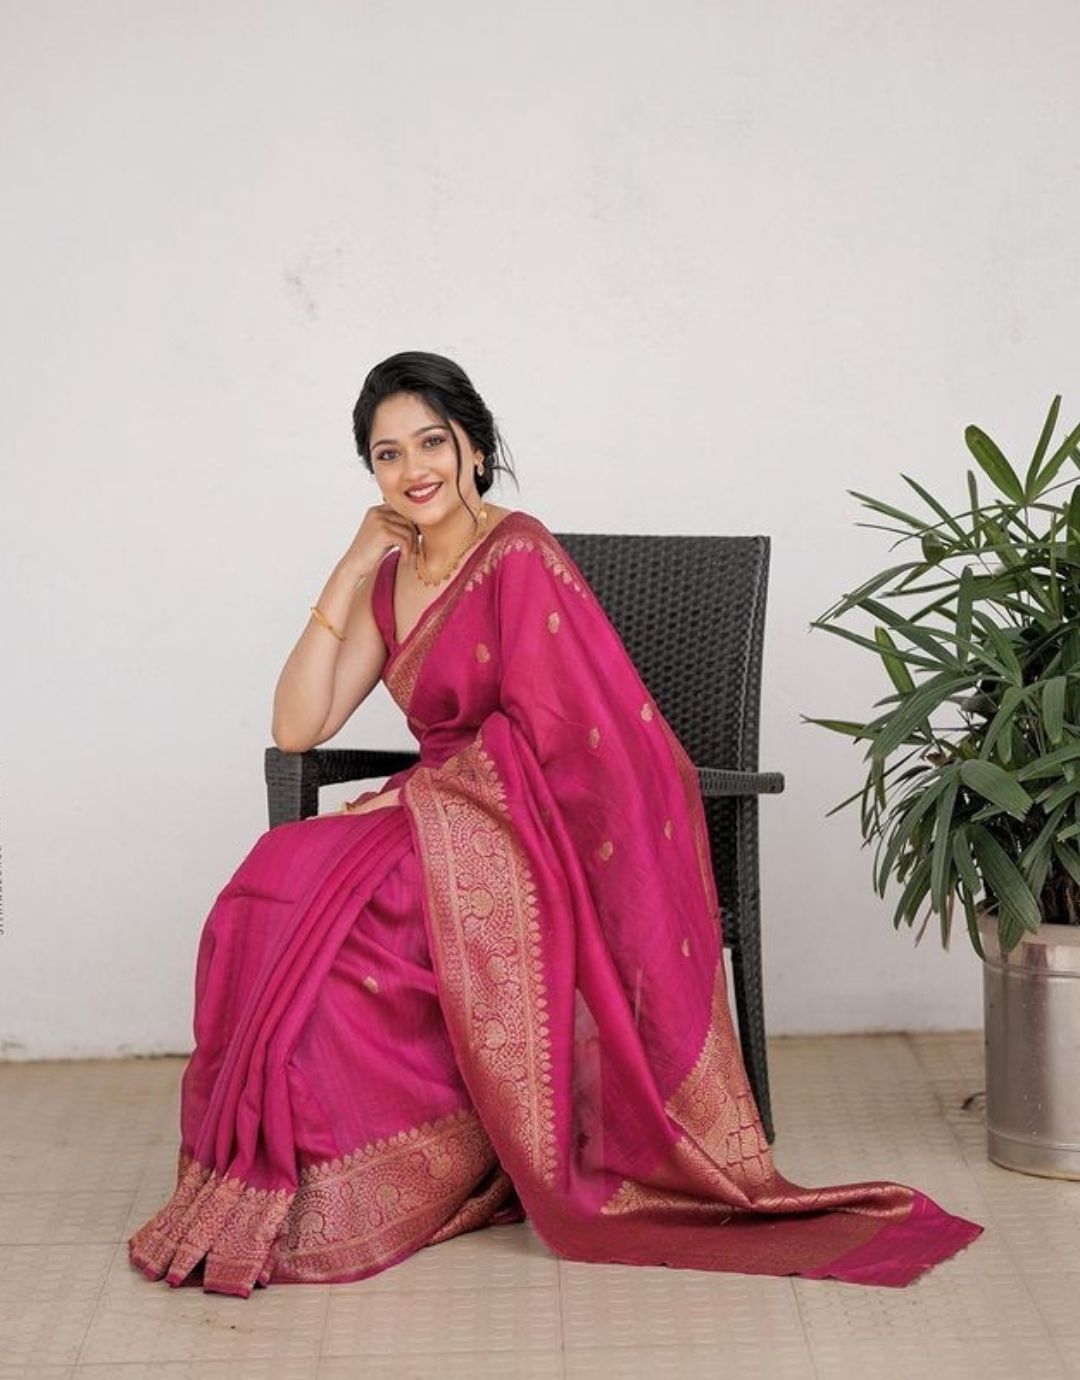 MAGENTA PINK TRADITIONAL KANCHI SOFT SILK SARI WITH ATTACHED BLOUSE